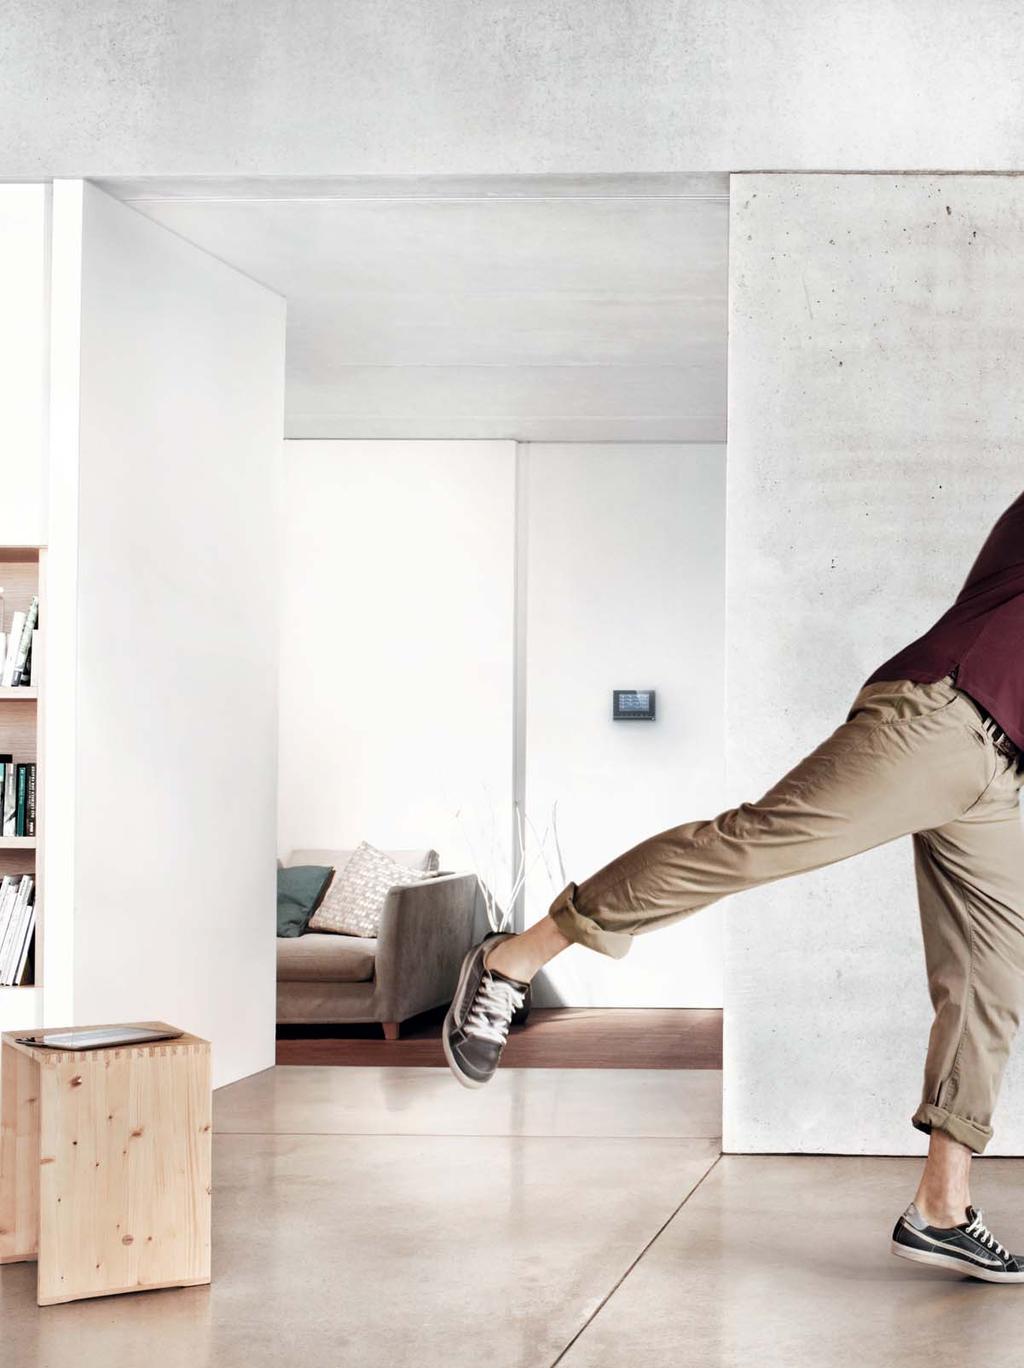 Liberating. As innovative home automation, ABB-free@home offers endless possibilities for creative design.